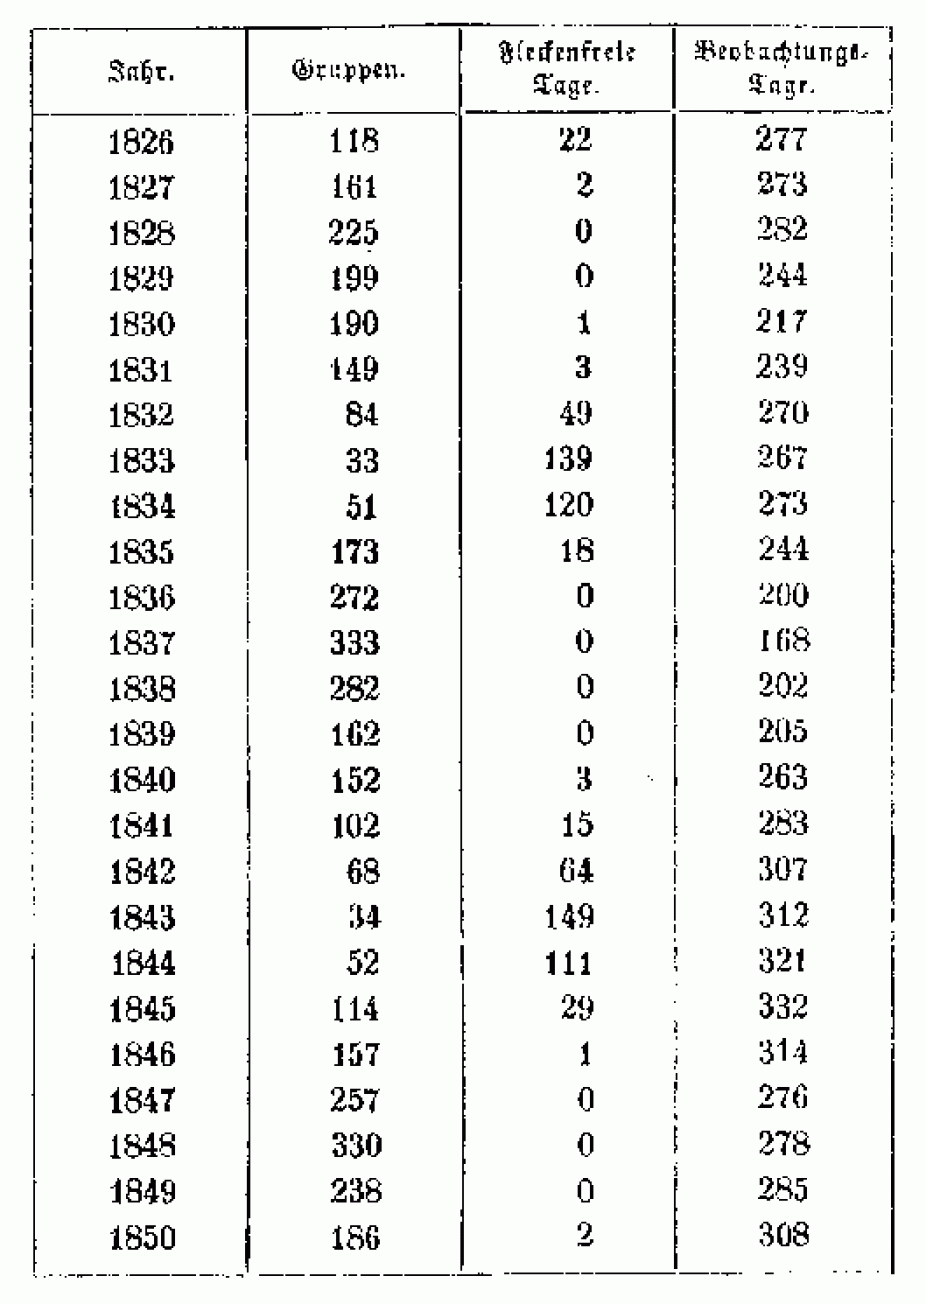 Table of Schwabe's sunspot observations for years 1826–1850 (column 1), the total number of sunspots groups observed on that year (column 2), the number of days without sunspots (column 3), and the number of days for which the Sun was observed (column 4)